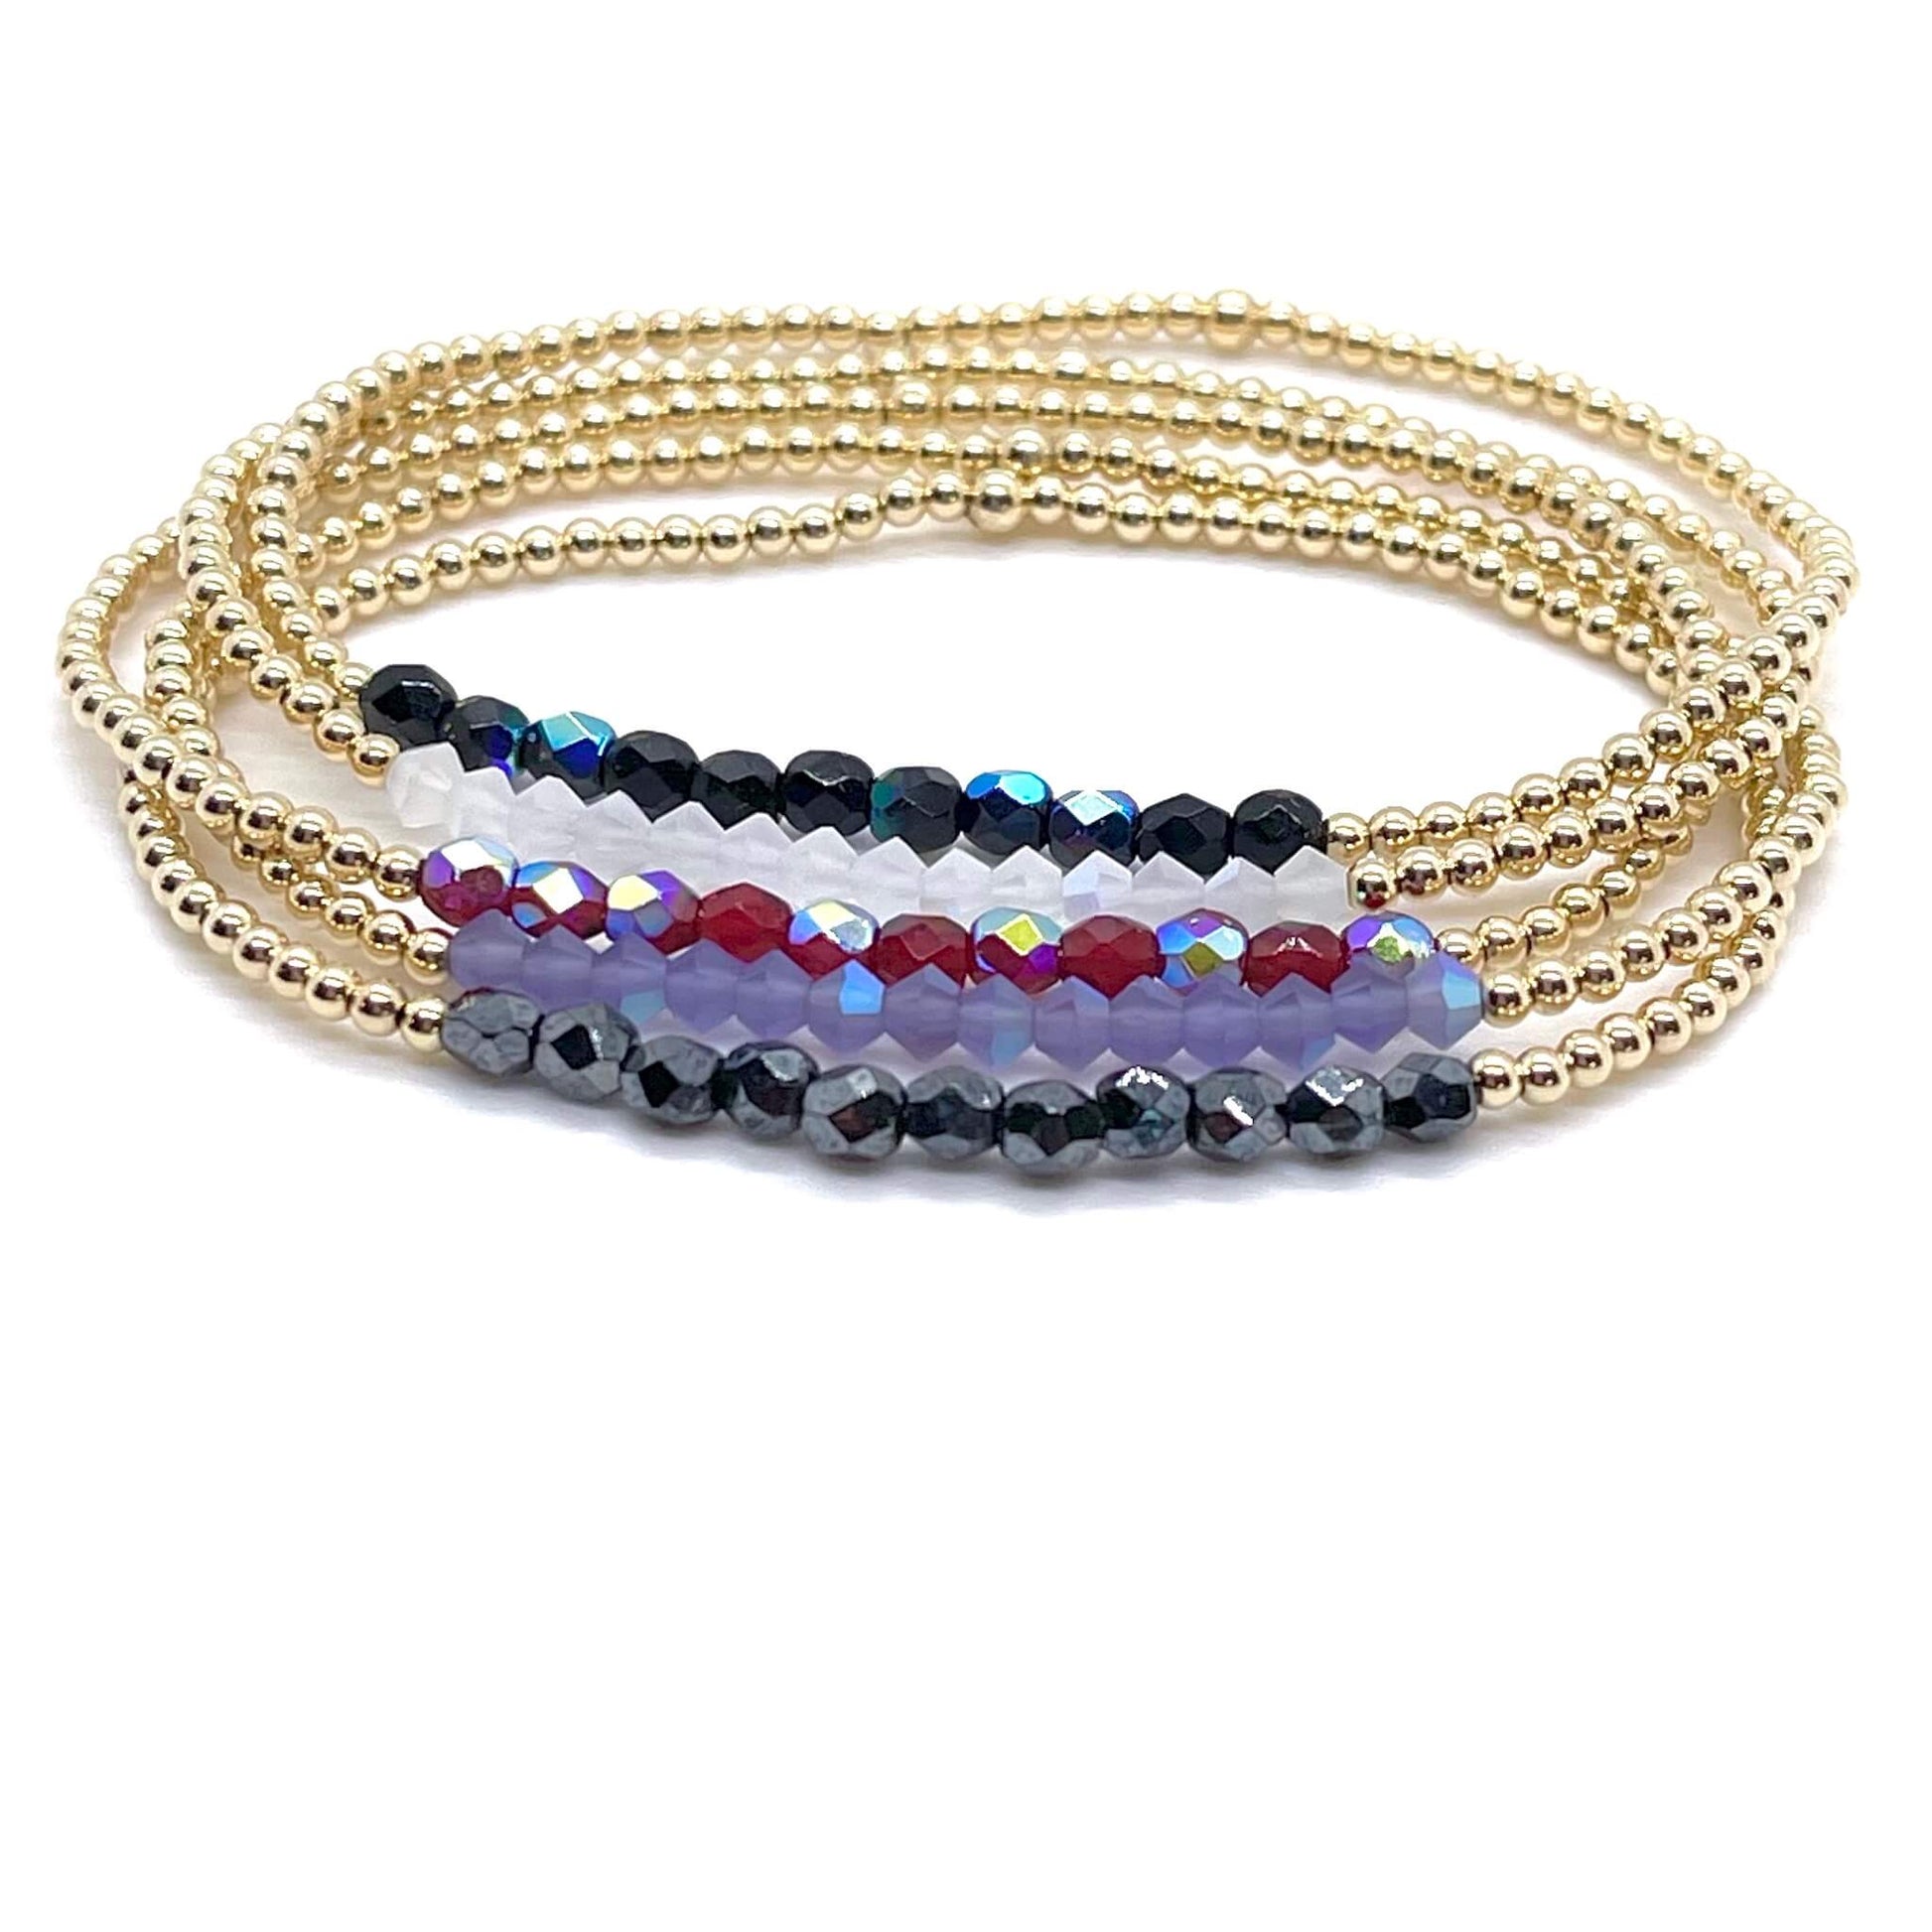 Crystal beaded bracelets with mixed colors. Gold and silver women's stretch bracelets with small crystal beads.